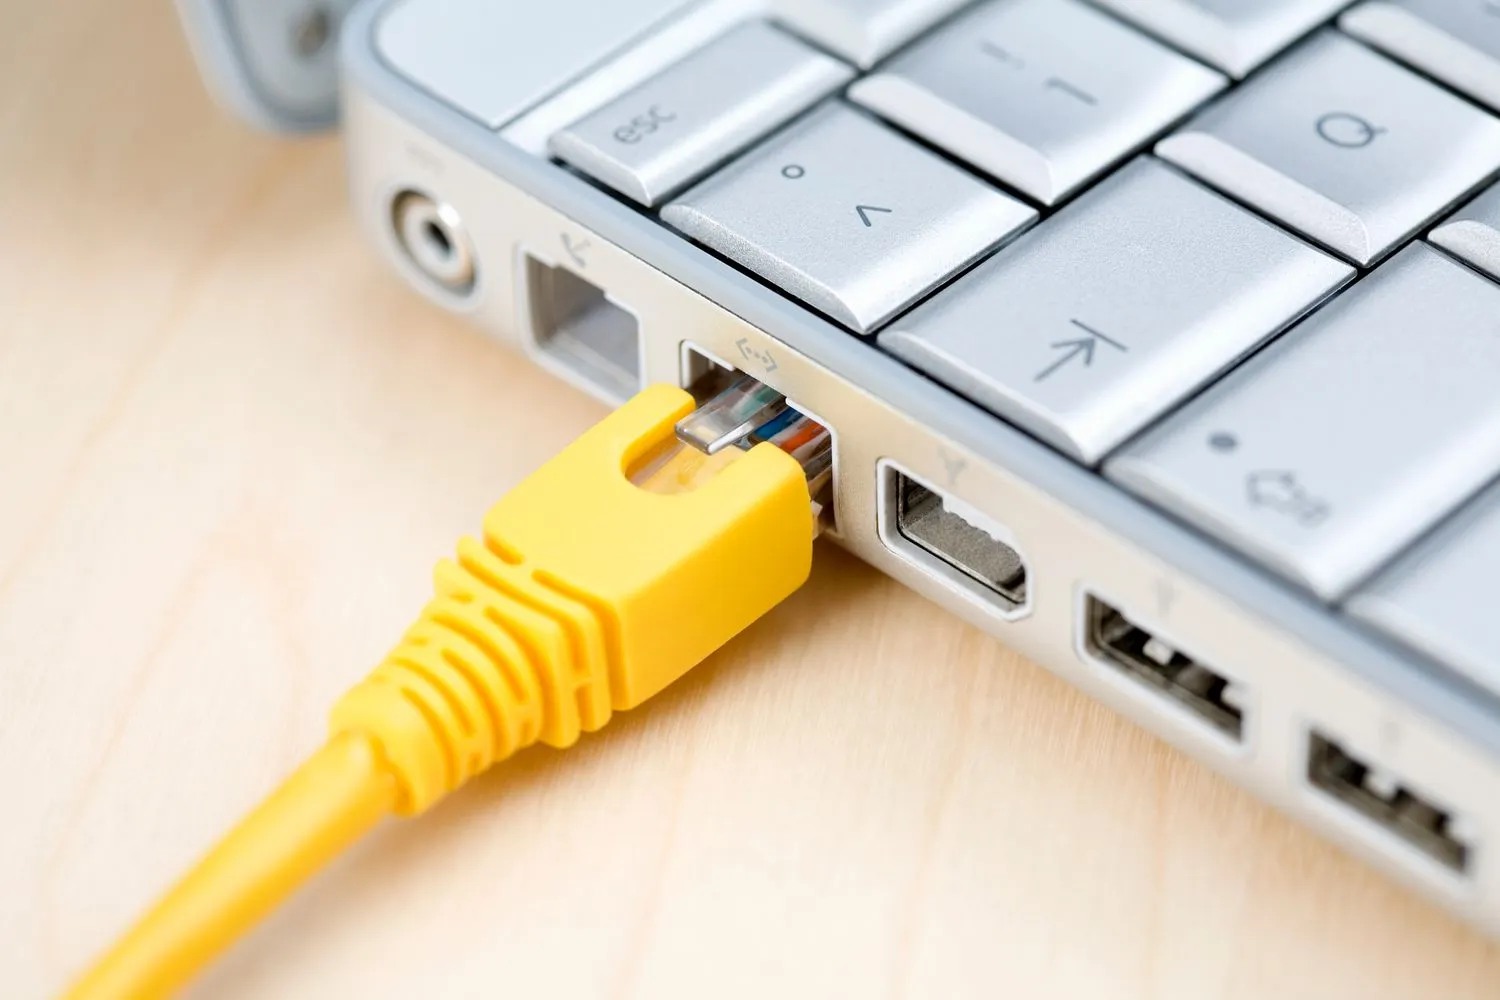 how to plug ethernet into laptop